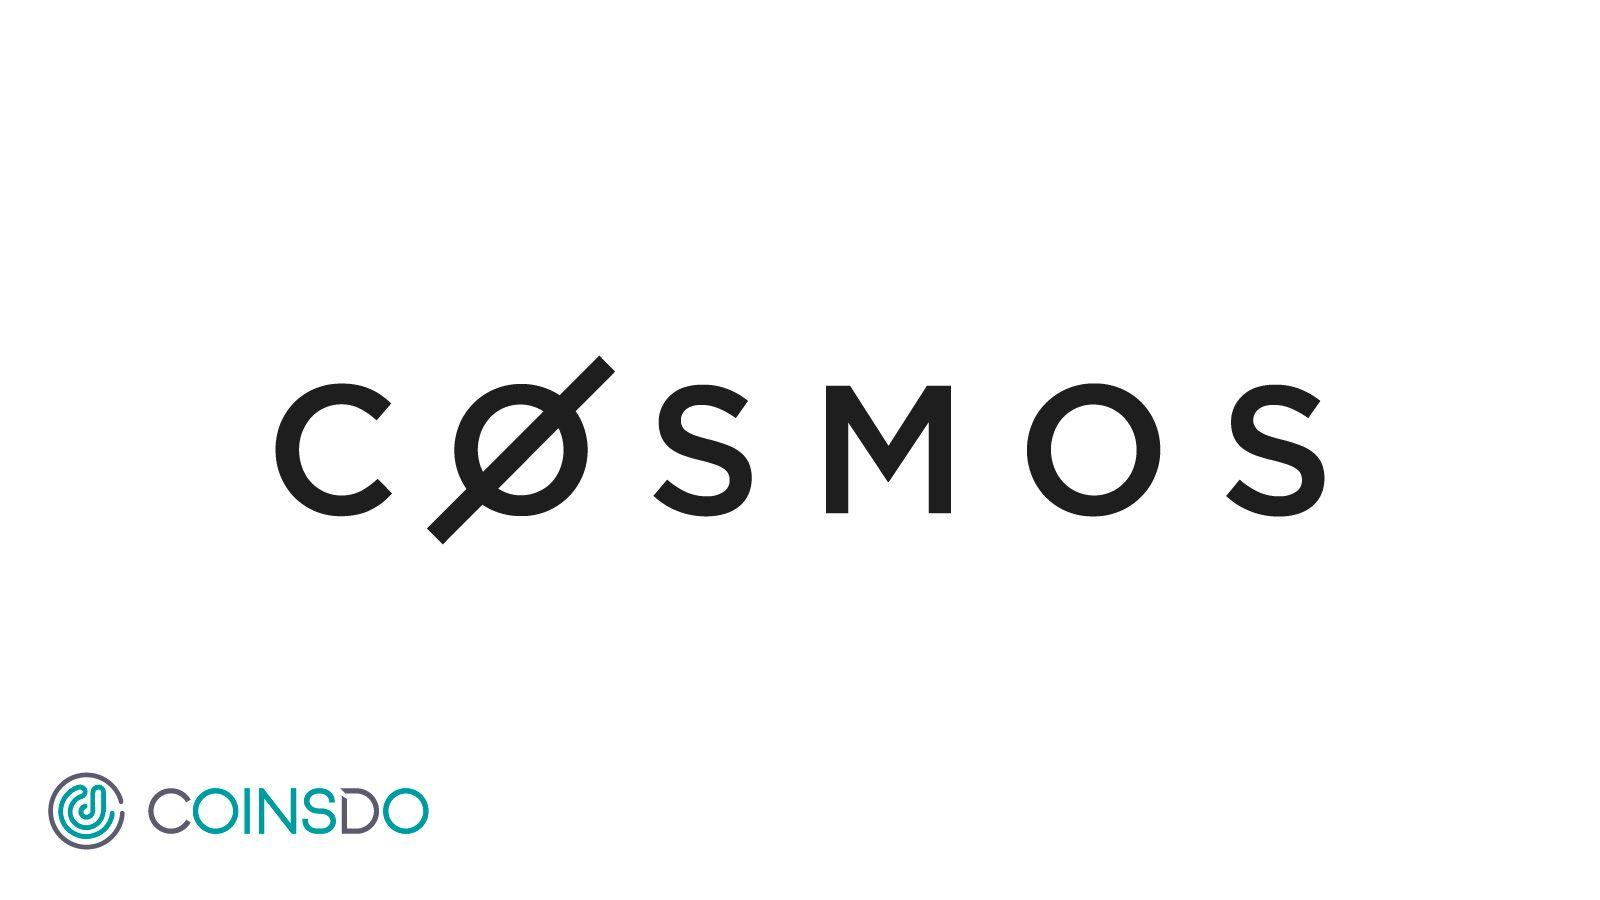 What is COSMOS?